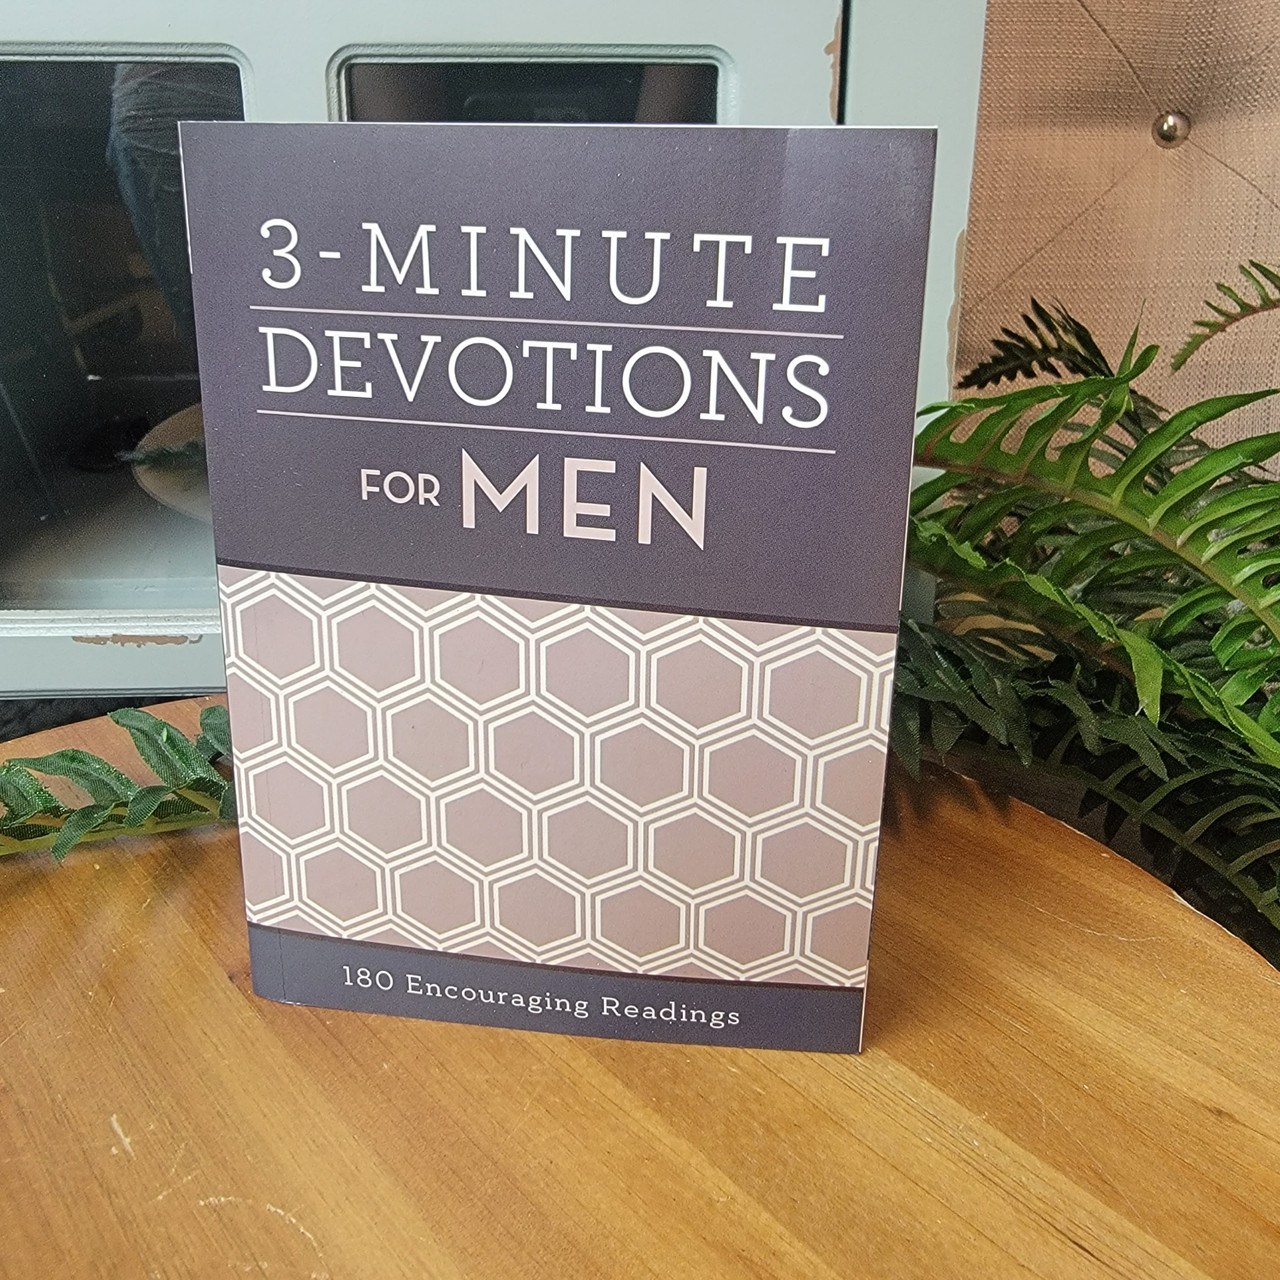 Devotions　Men　for　3-Minute　mulberrycottage